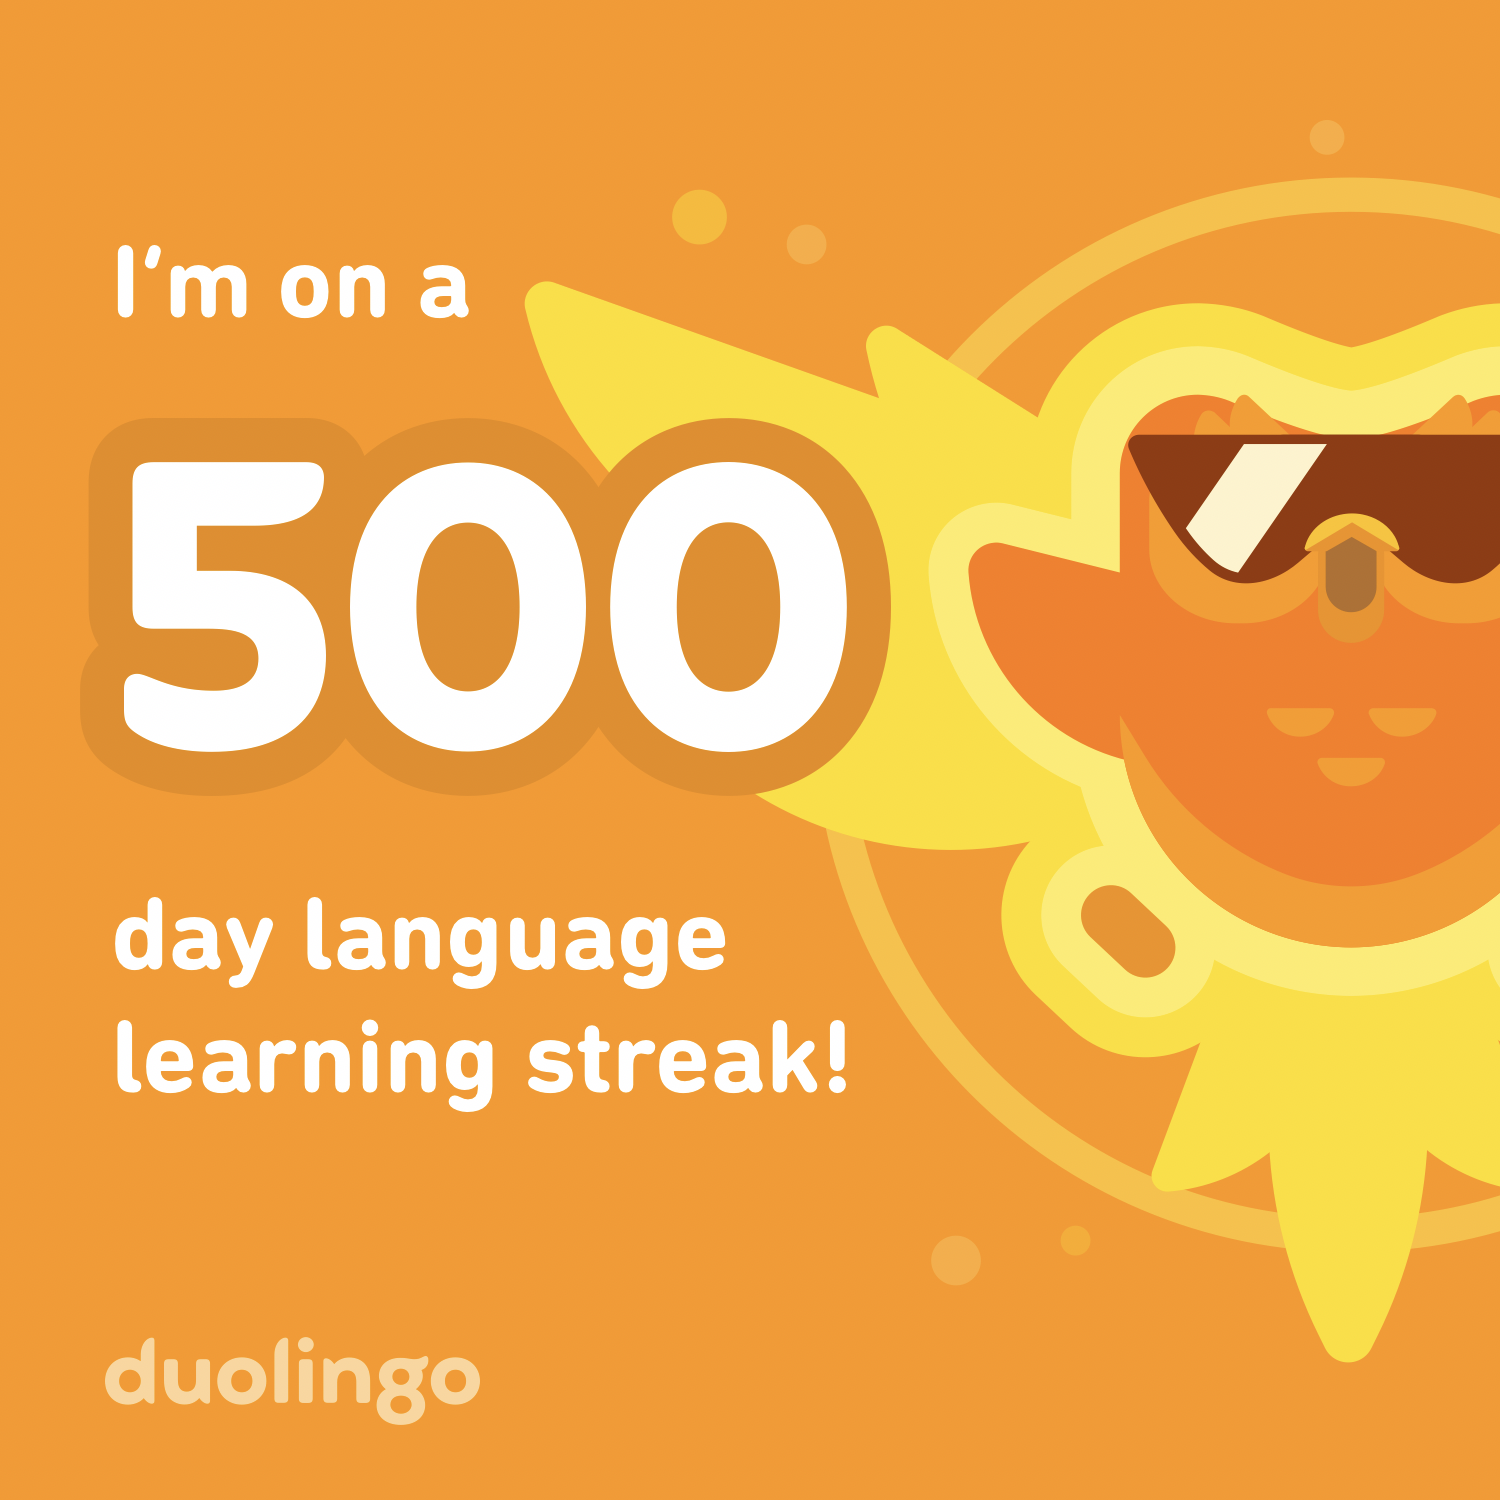 'Graphic on light orange background. In the centre there's a yellow a medium to dark orange coloured cartoon owl with sunglasses on and yellow flames coming out the back of it. Below the owl in white text it says: "500 day language learning streak!"'
